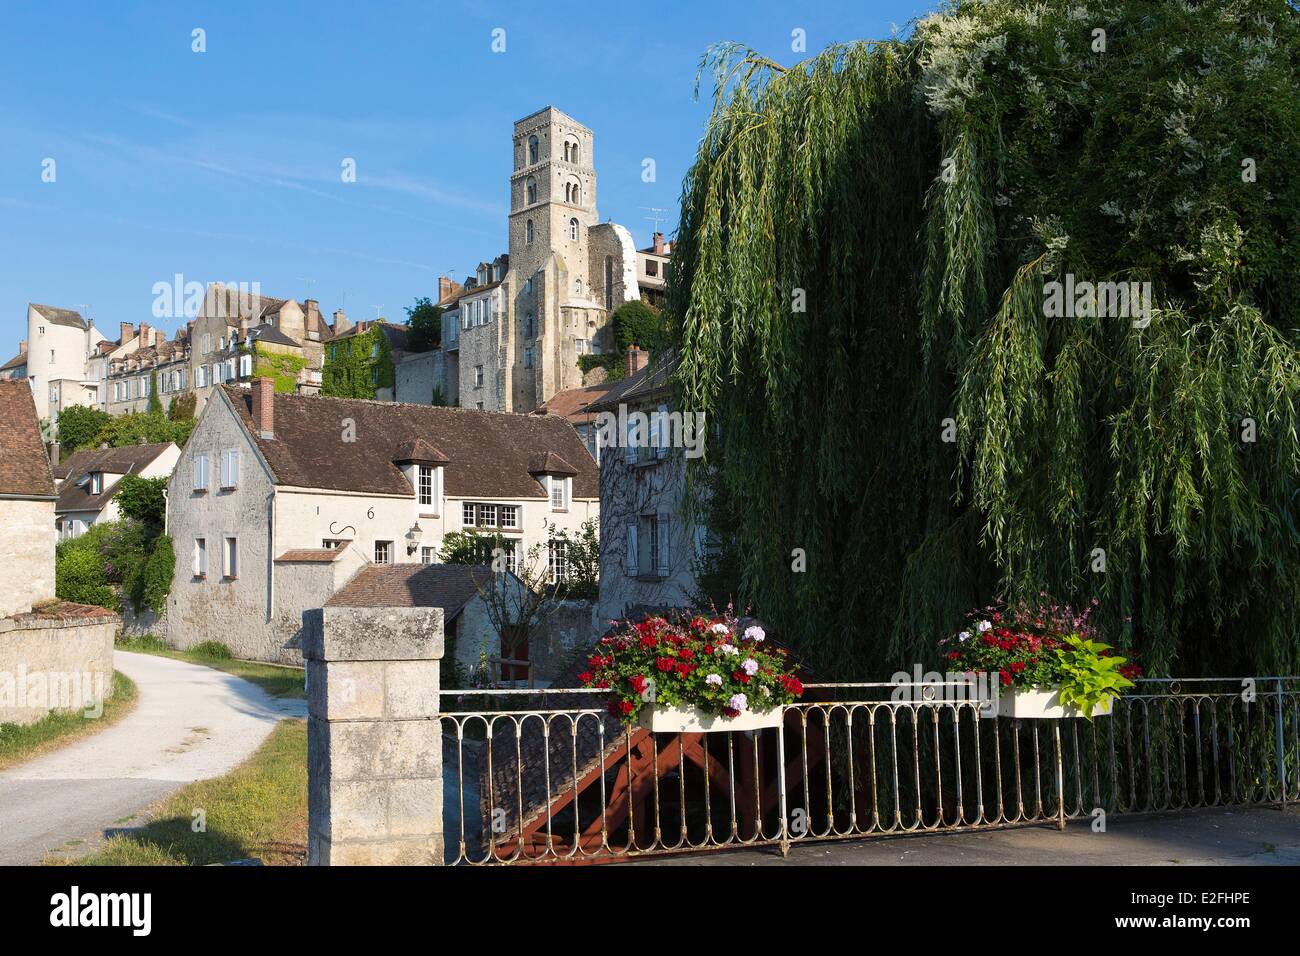 France Seine et Marne Chateau Landon St Thugal tower in the center and genaral view of the mediaval village from the riverside Stock Photo